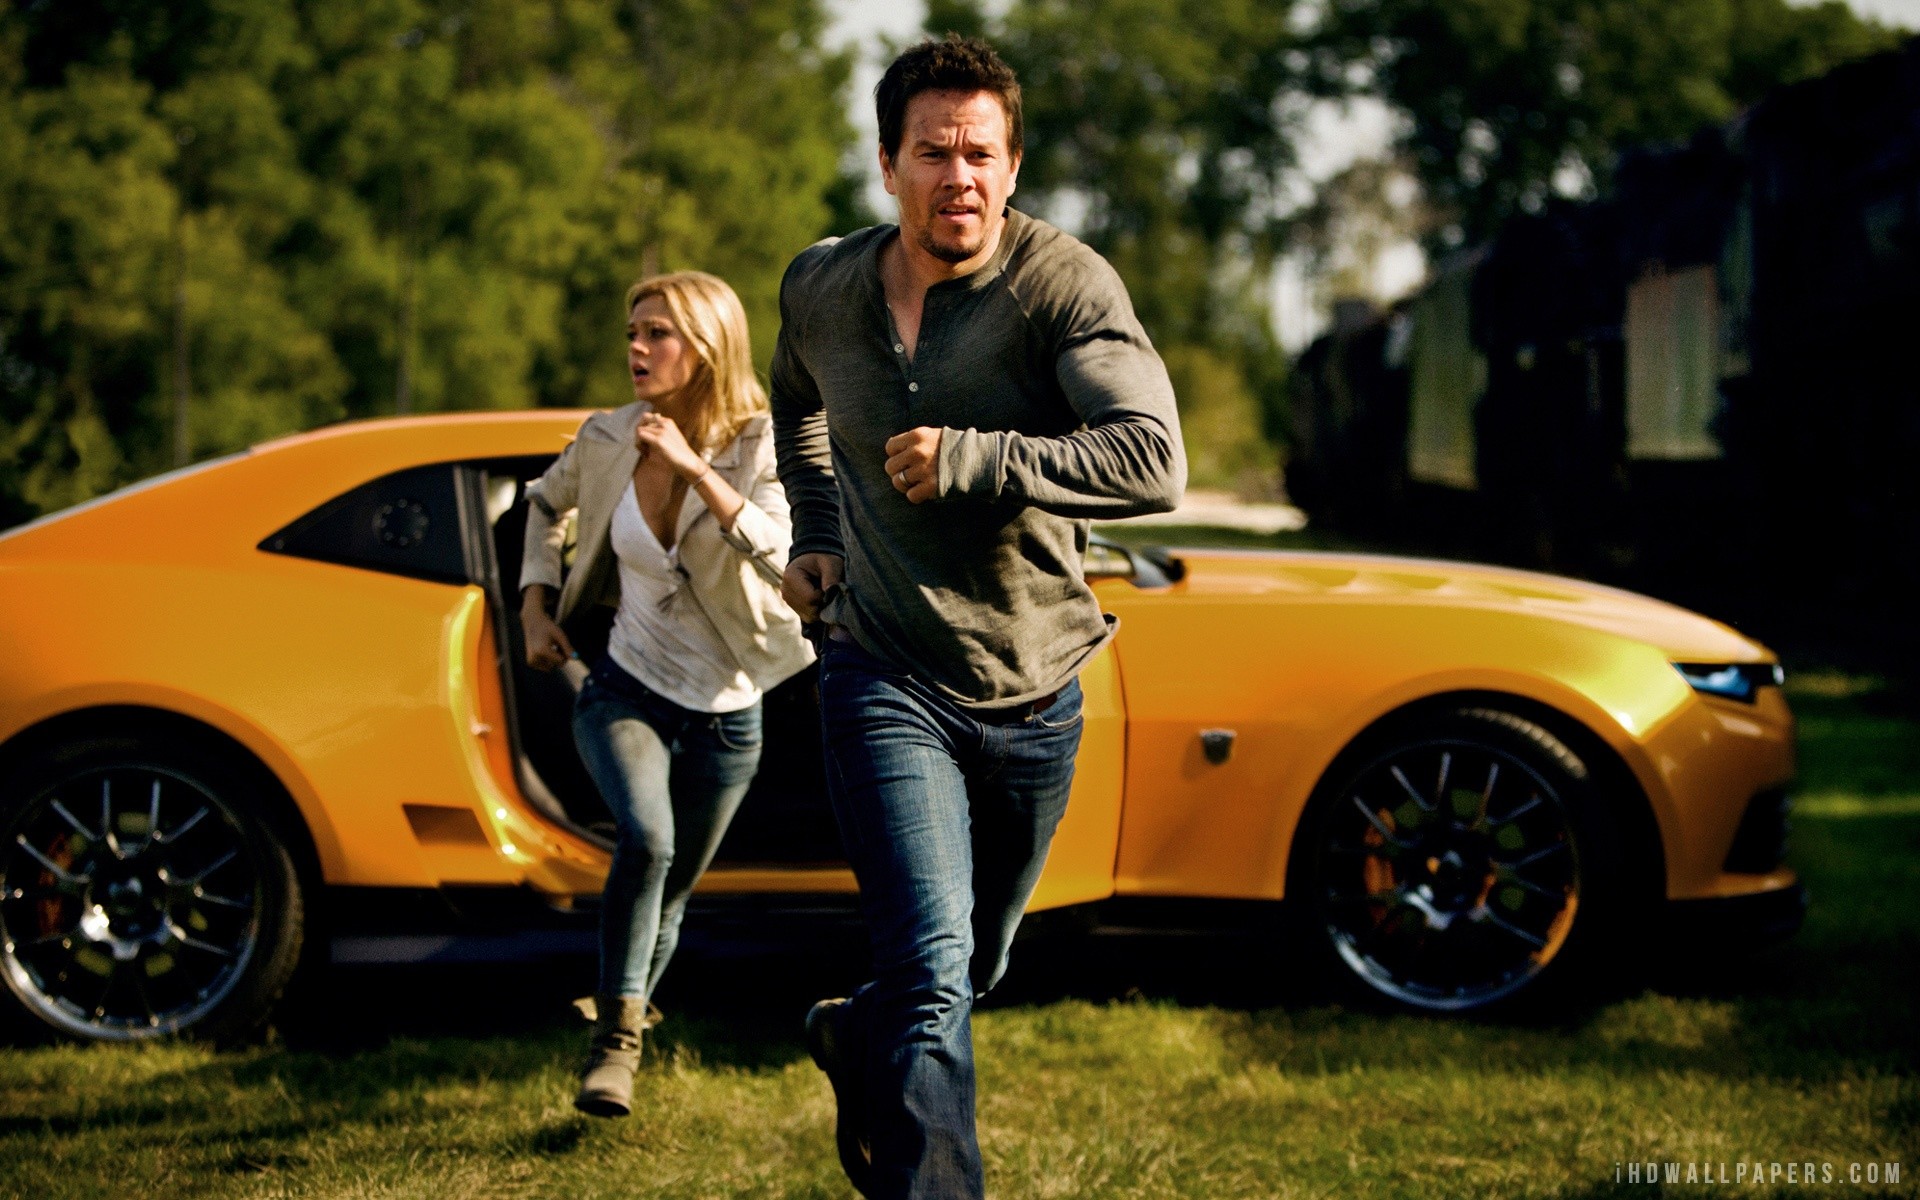 1920x1200 Transformers 4 Movie Live Action HD Wallpaper - iHD Wallpapers